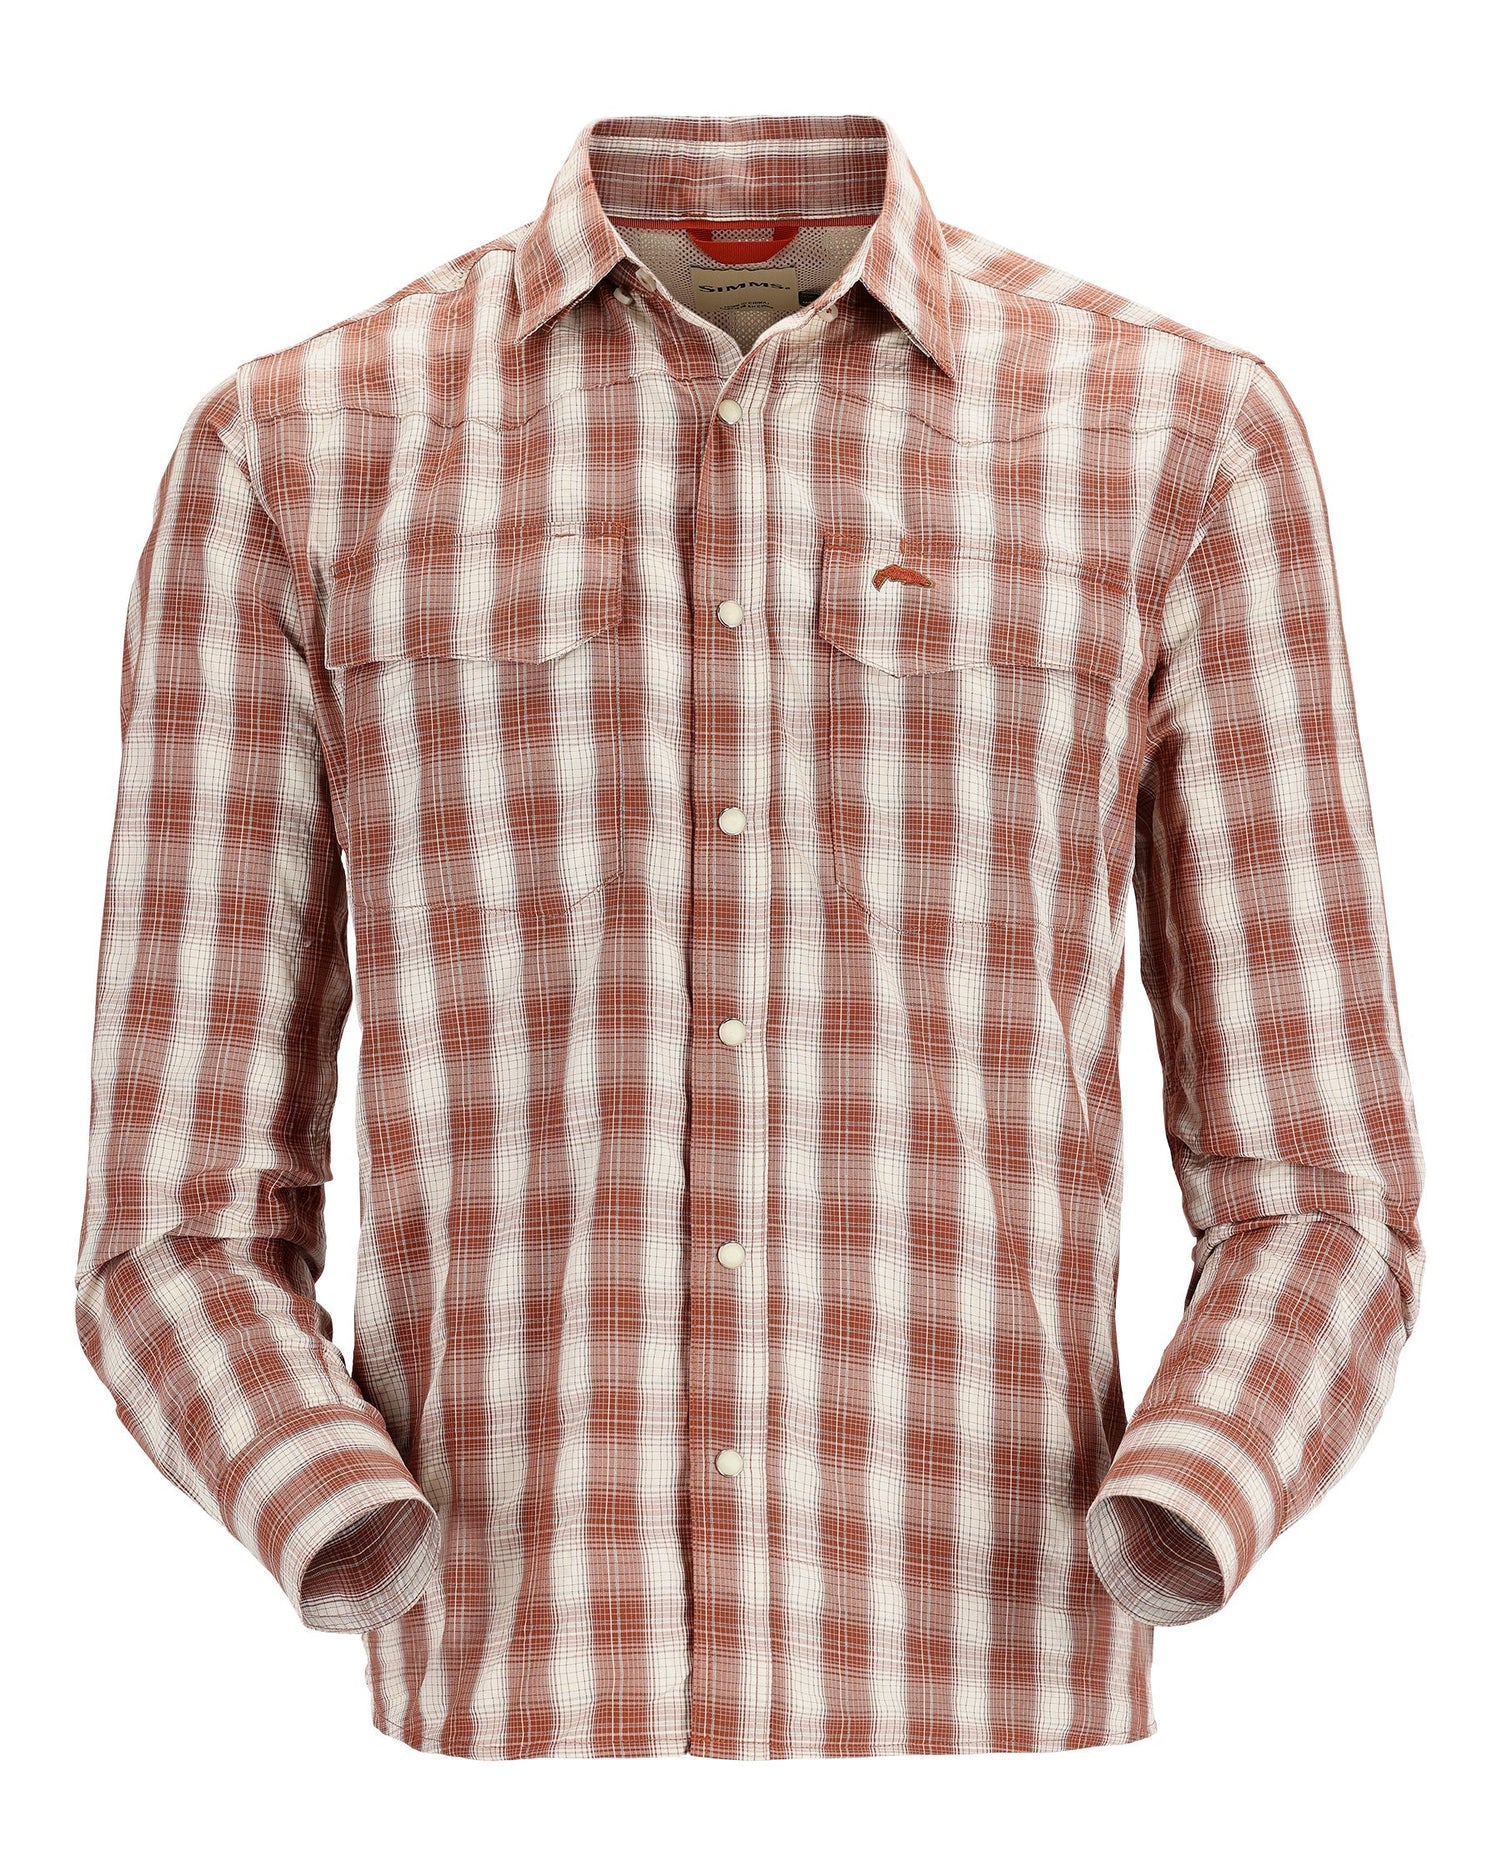 M'S BIG SKY LS SHIRT CLAY/HICKORY PLAID-on-mannequin